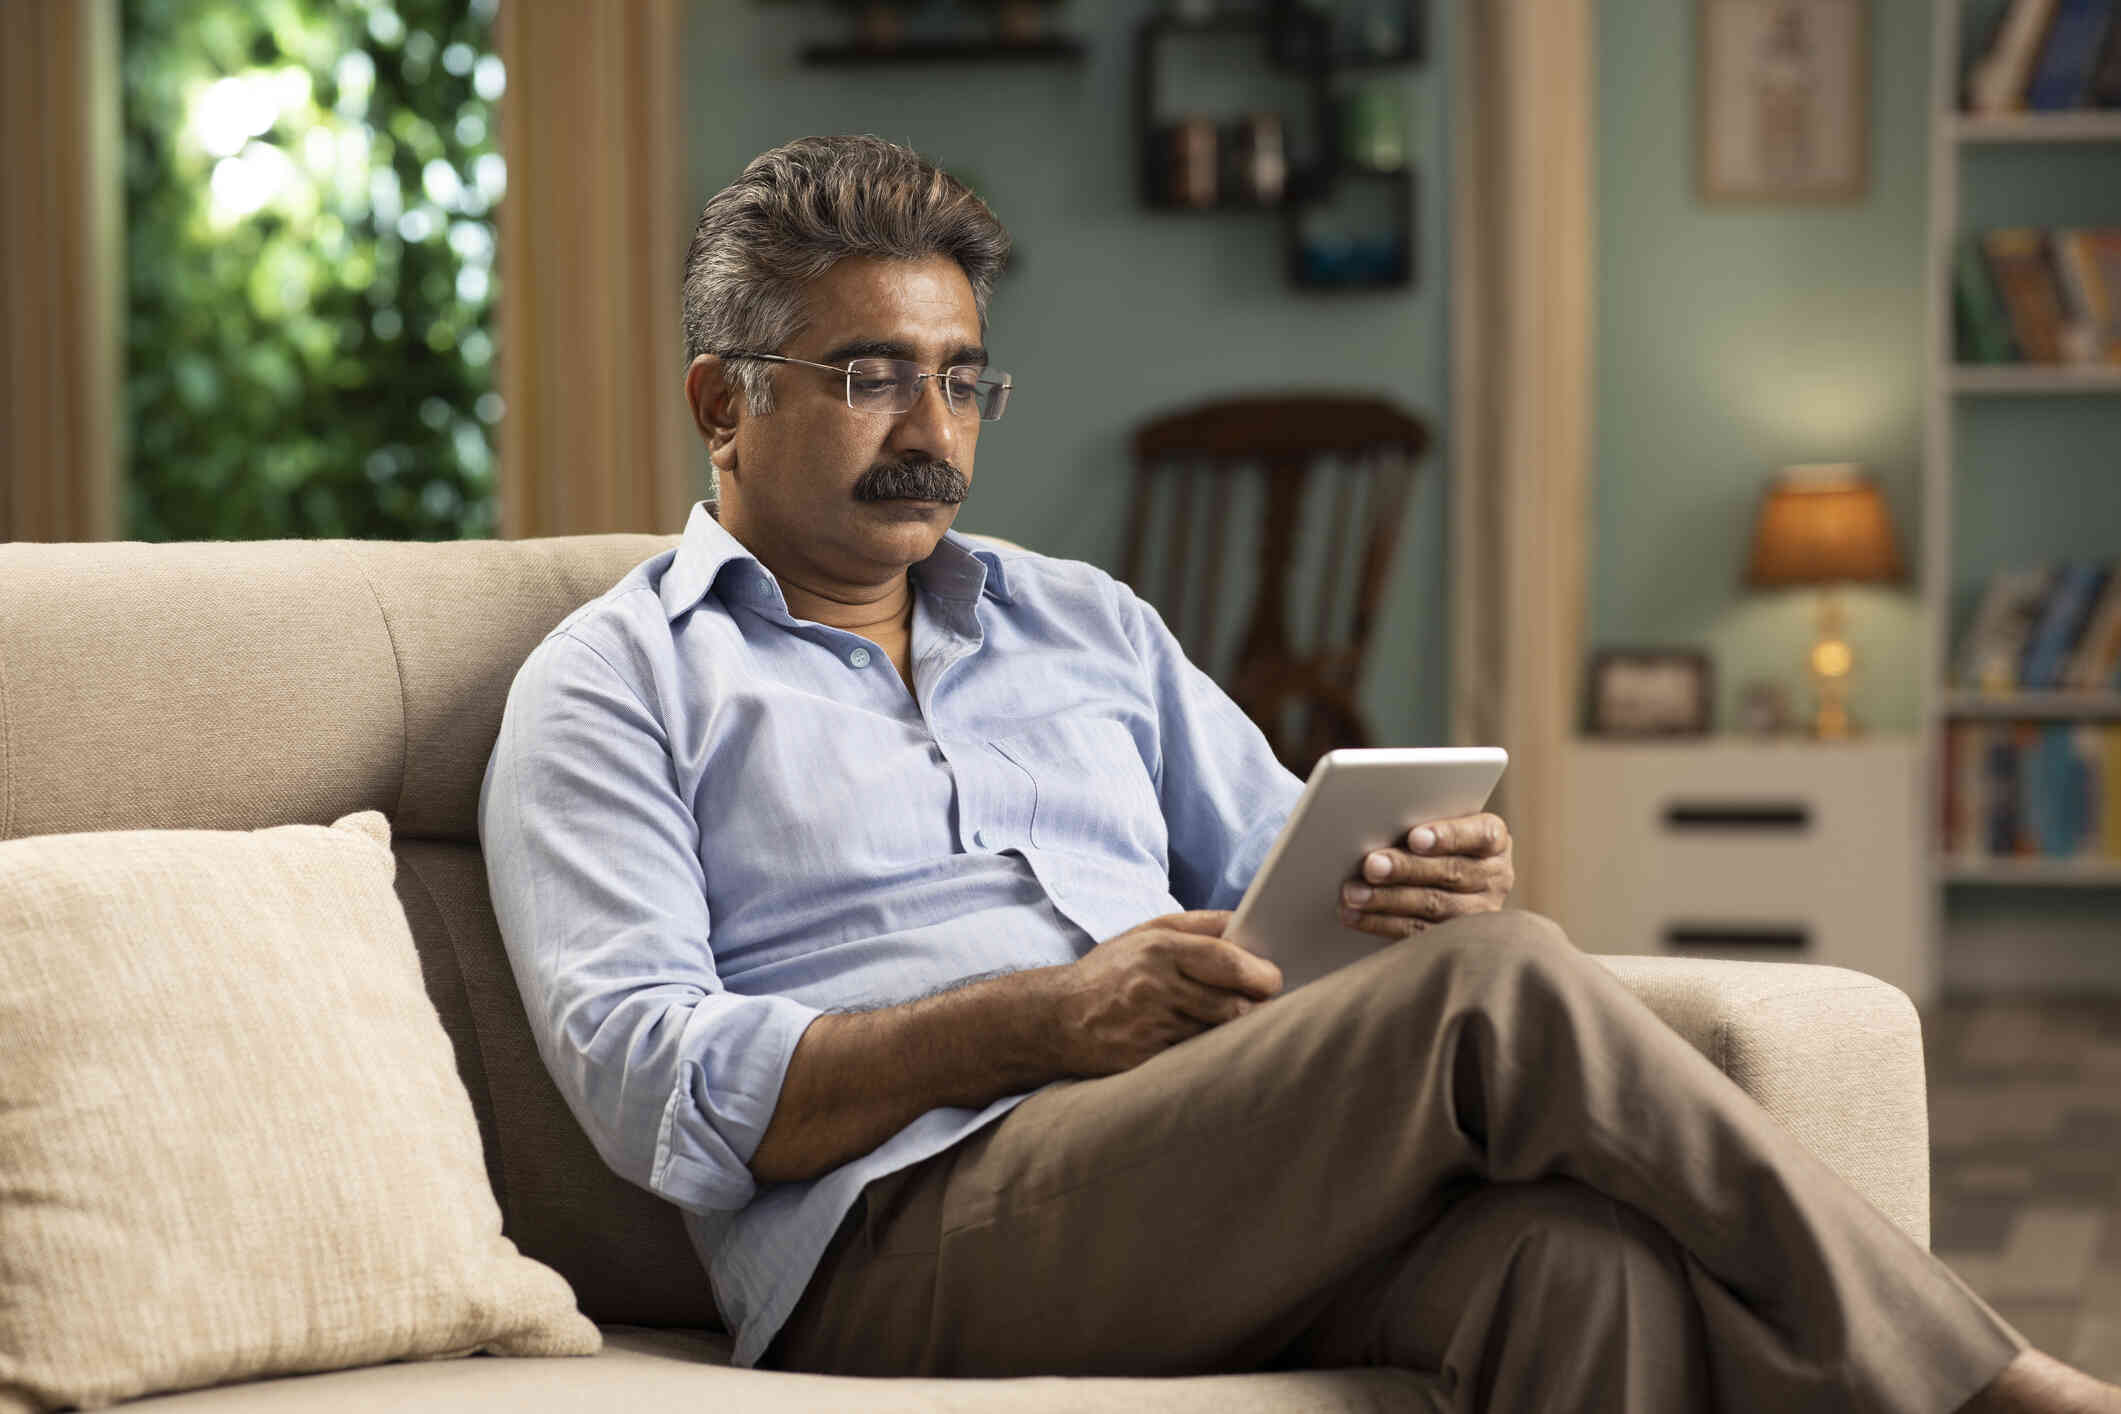 A middle aged man in a button down shirt and glasses sits on his couch in his home and looks at the tablet in his hands with a serious expression.